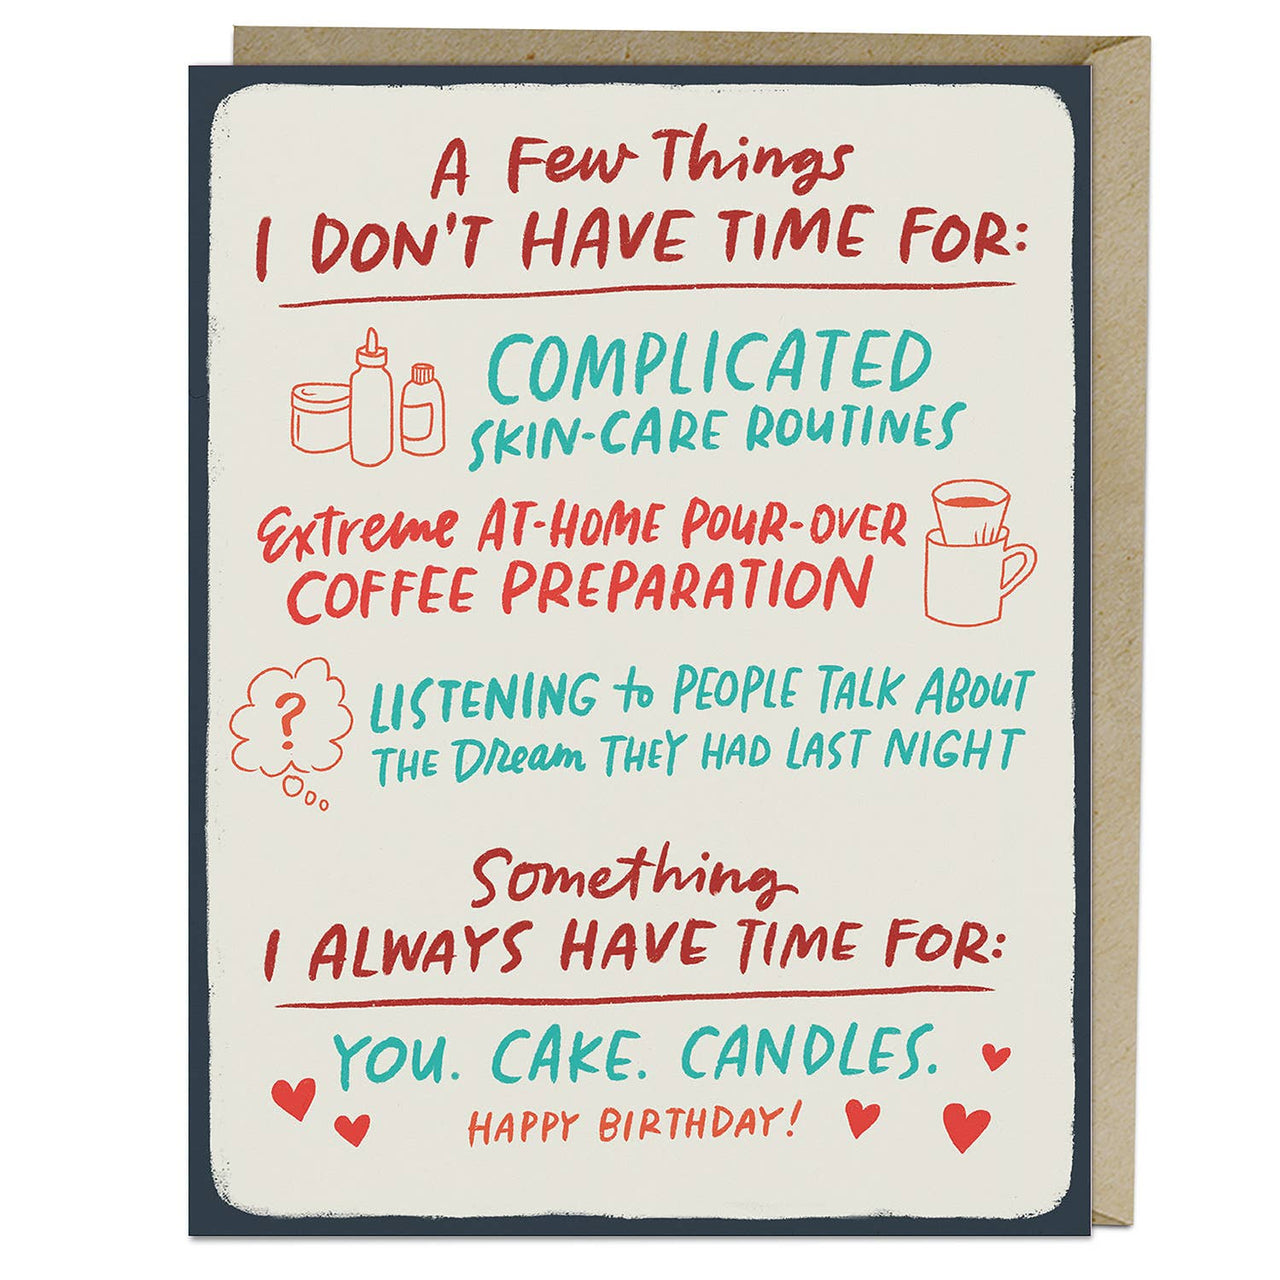 You, Cake, Candles Birthday Card